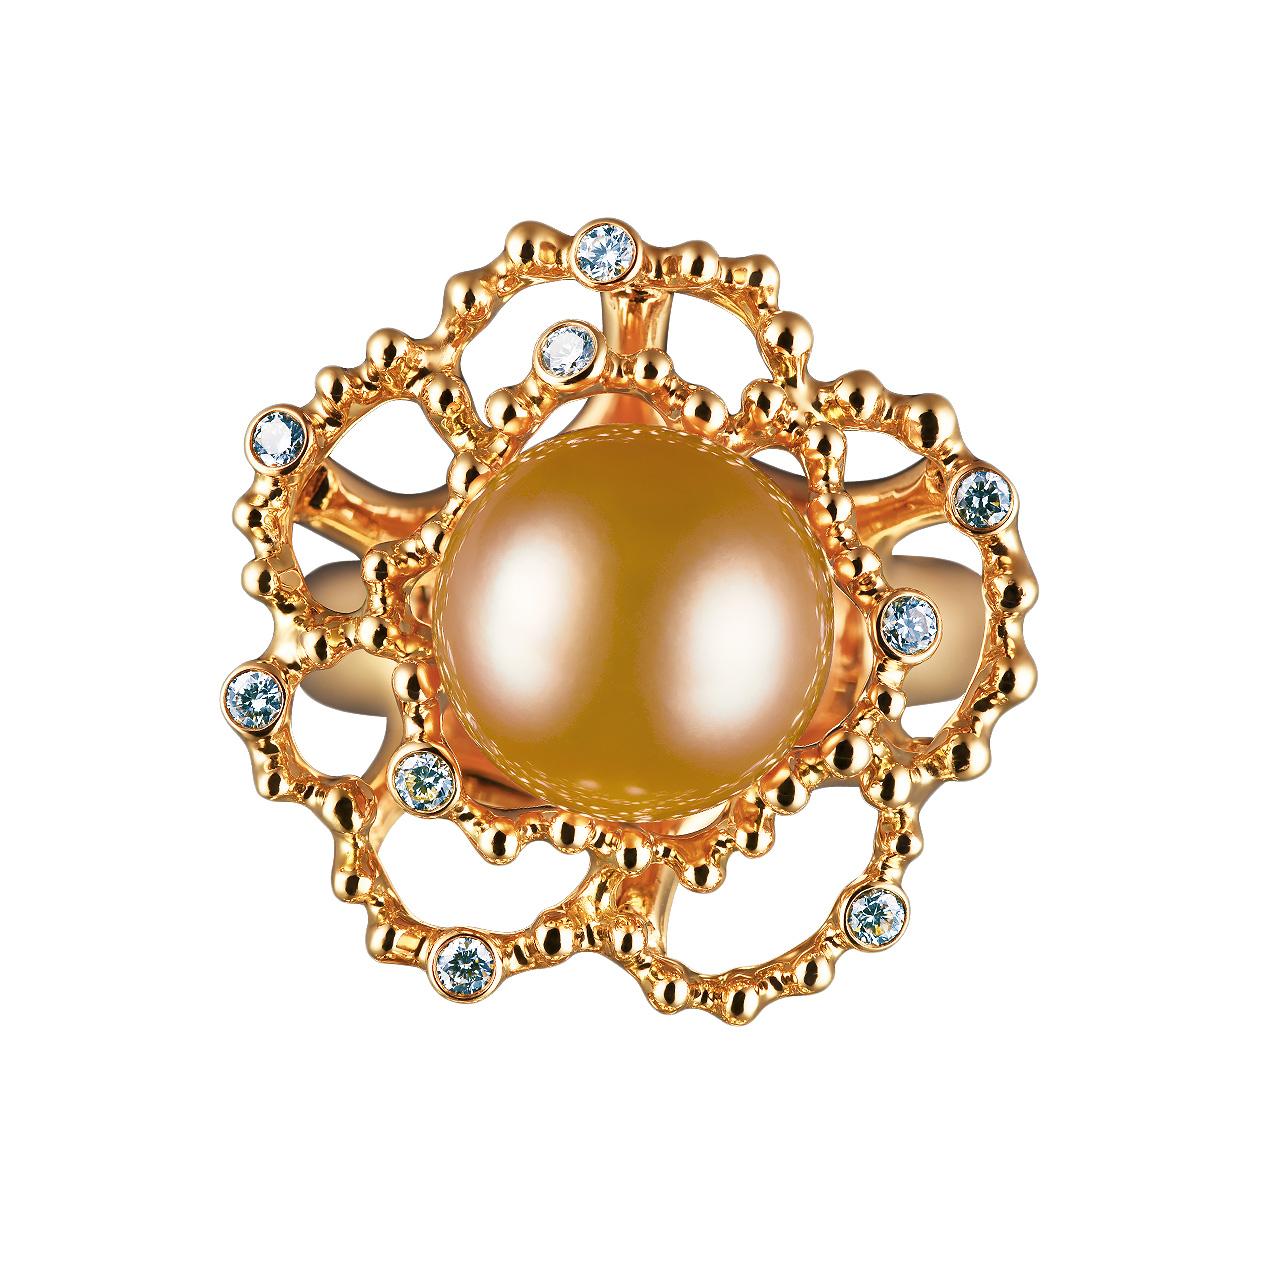 - 10 Round Diamonds - 0.14 ct, G/VVS
- 8-8.5 mm Golden South Sea pearl 
- 18K Yellow Gold 
- Weight: 9.43 g
- Size: 16.4 mm
This elegant ring from the Byzantium collection is adorned with a lustrous golden pearl of the South Sea surrounded by